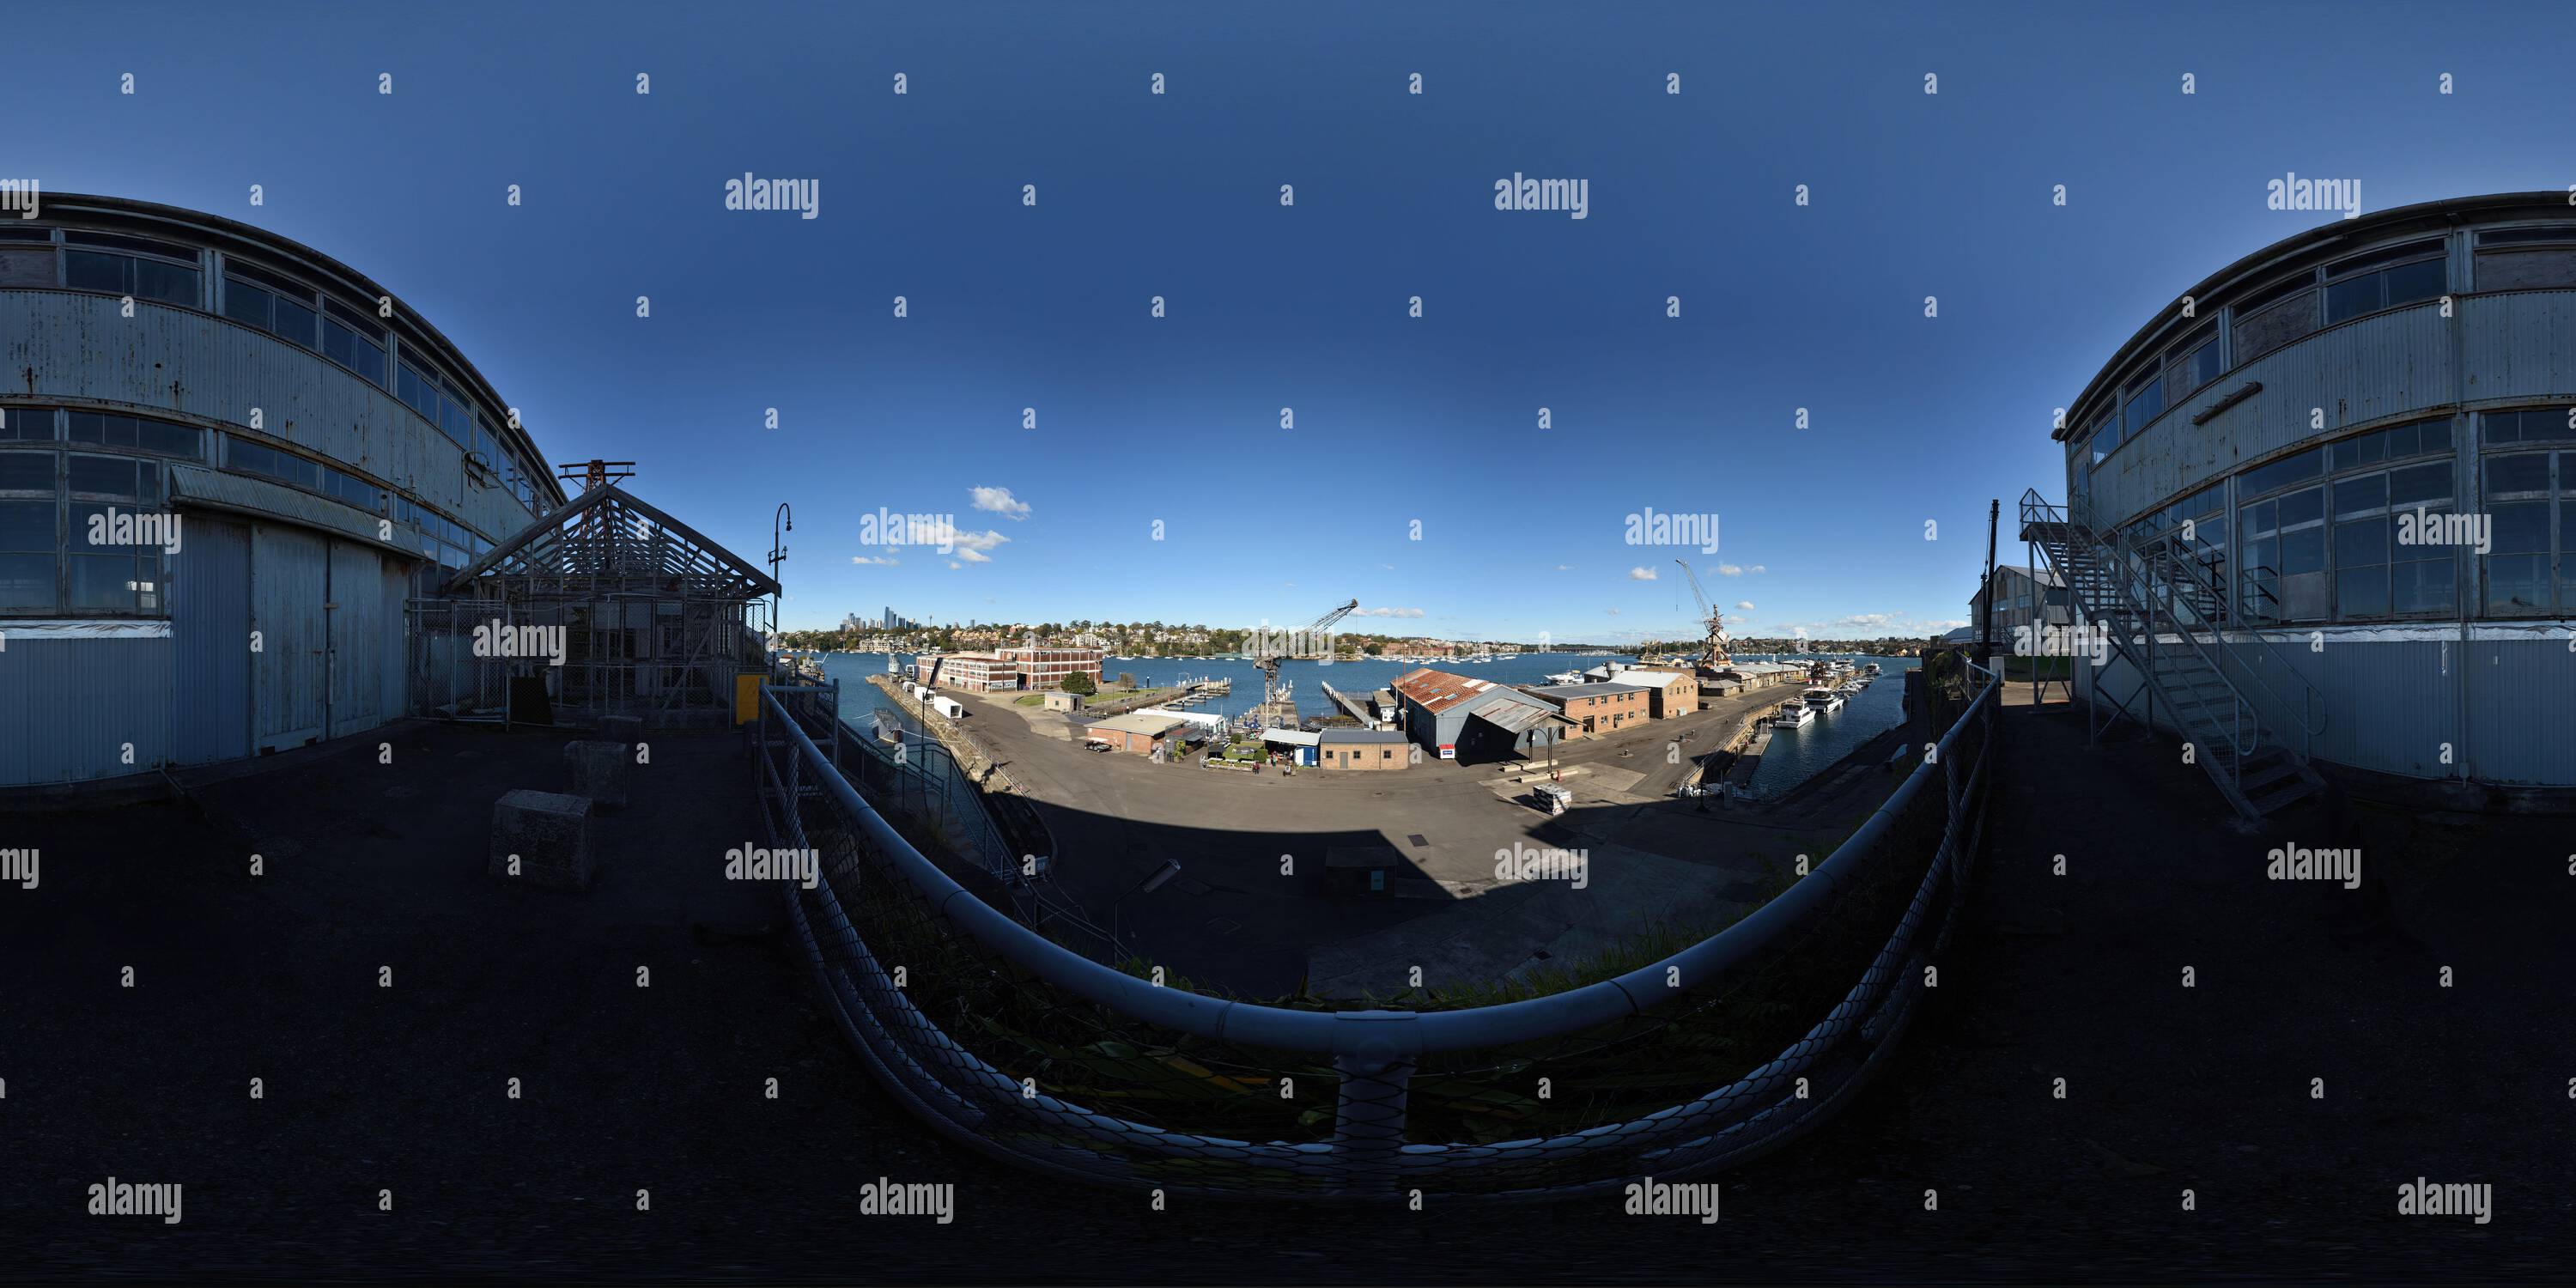 360 degree panoramic view of 360° Panorama, Steps to The Docks Precinct, Fitzroy and Sutherland Docks from above, on the perimeter of the Ship Building Precinct at Cockatoo Island